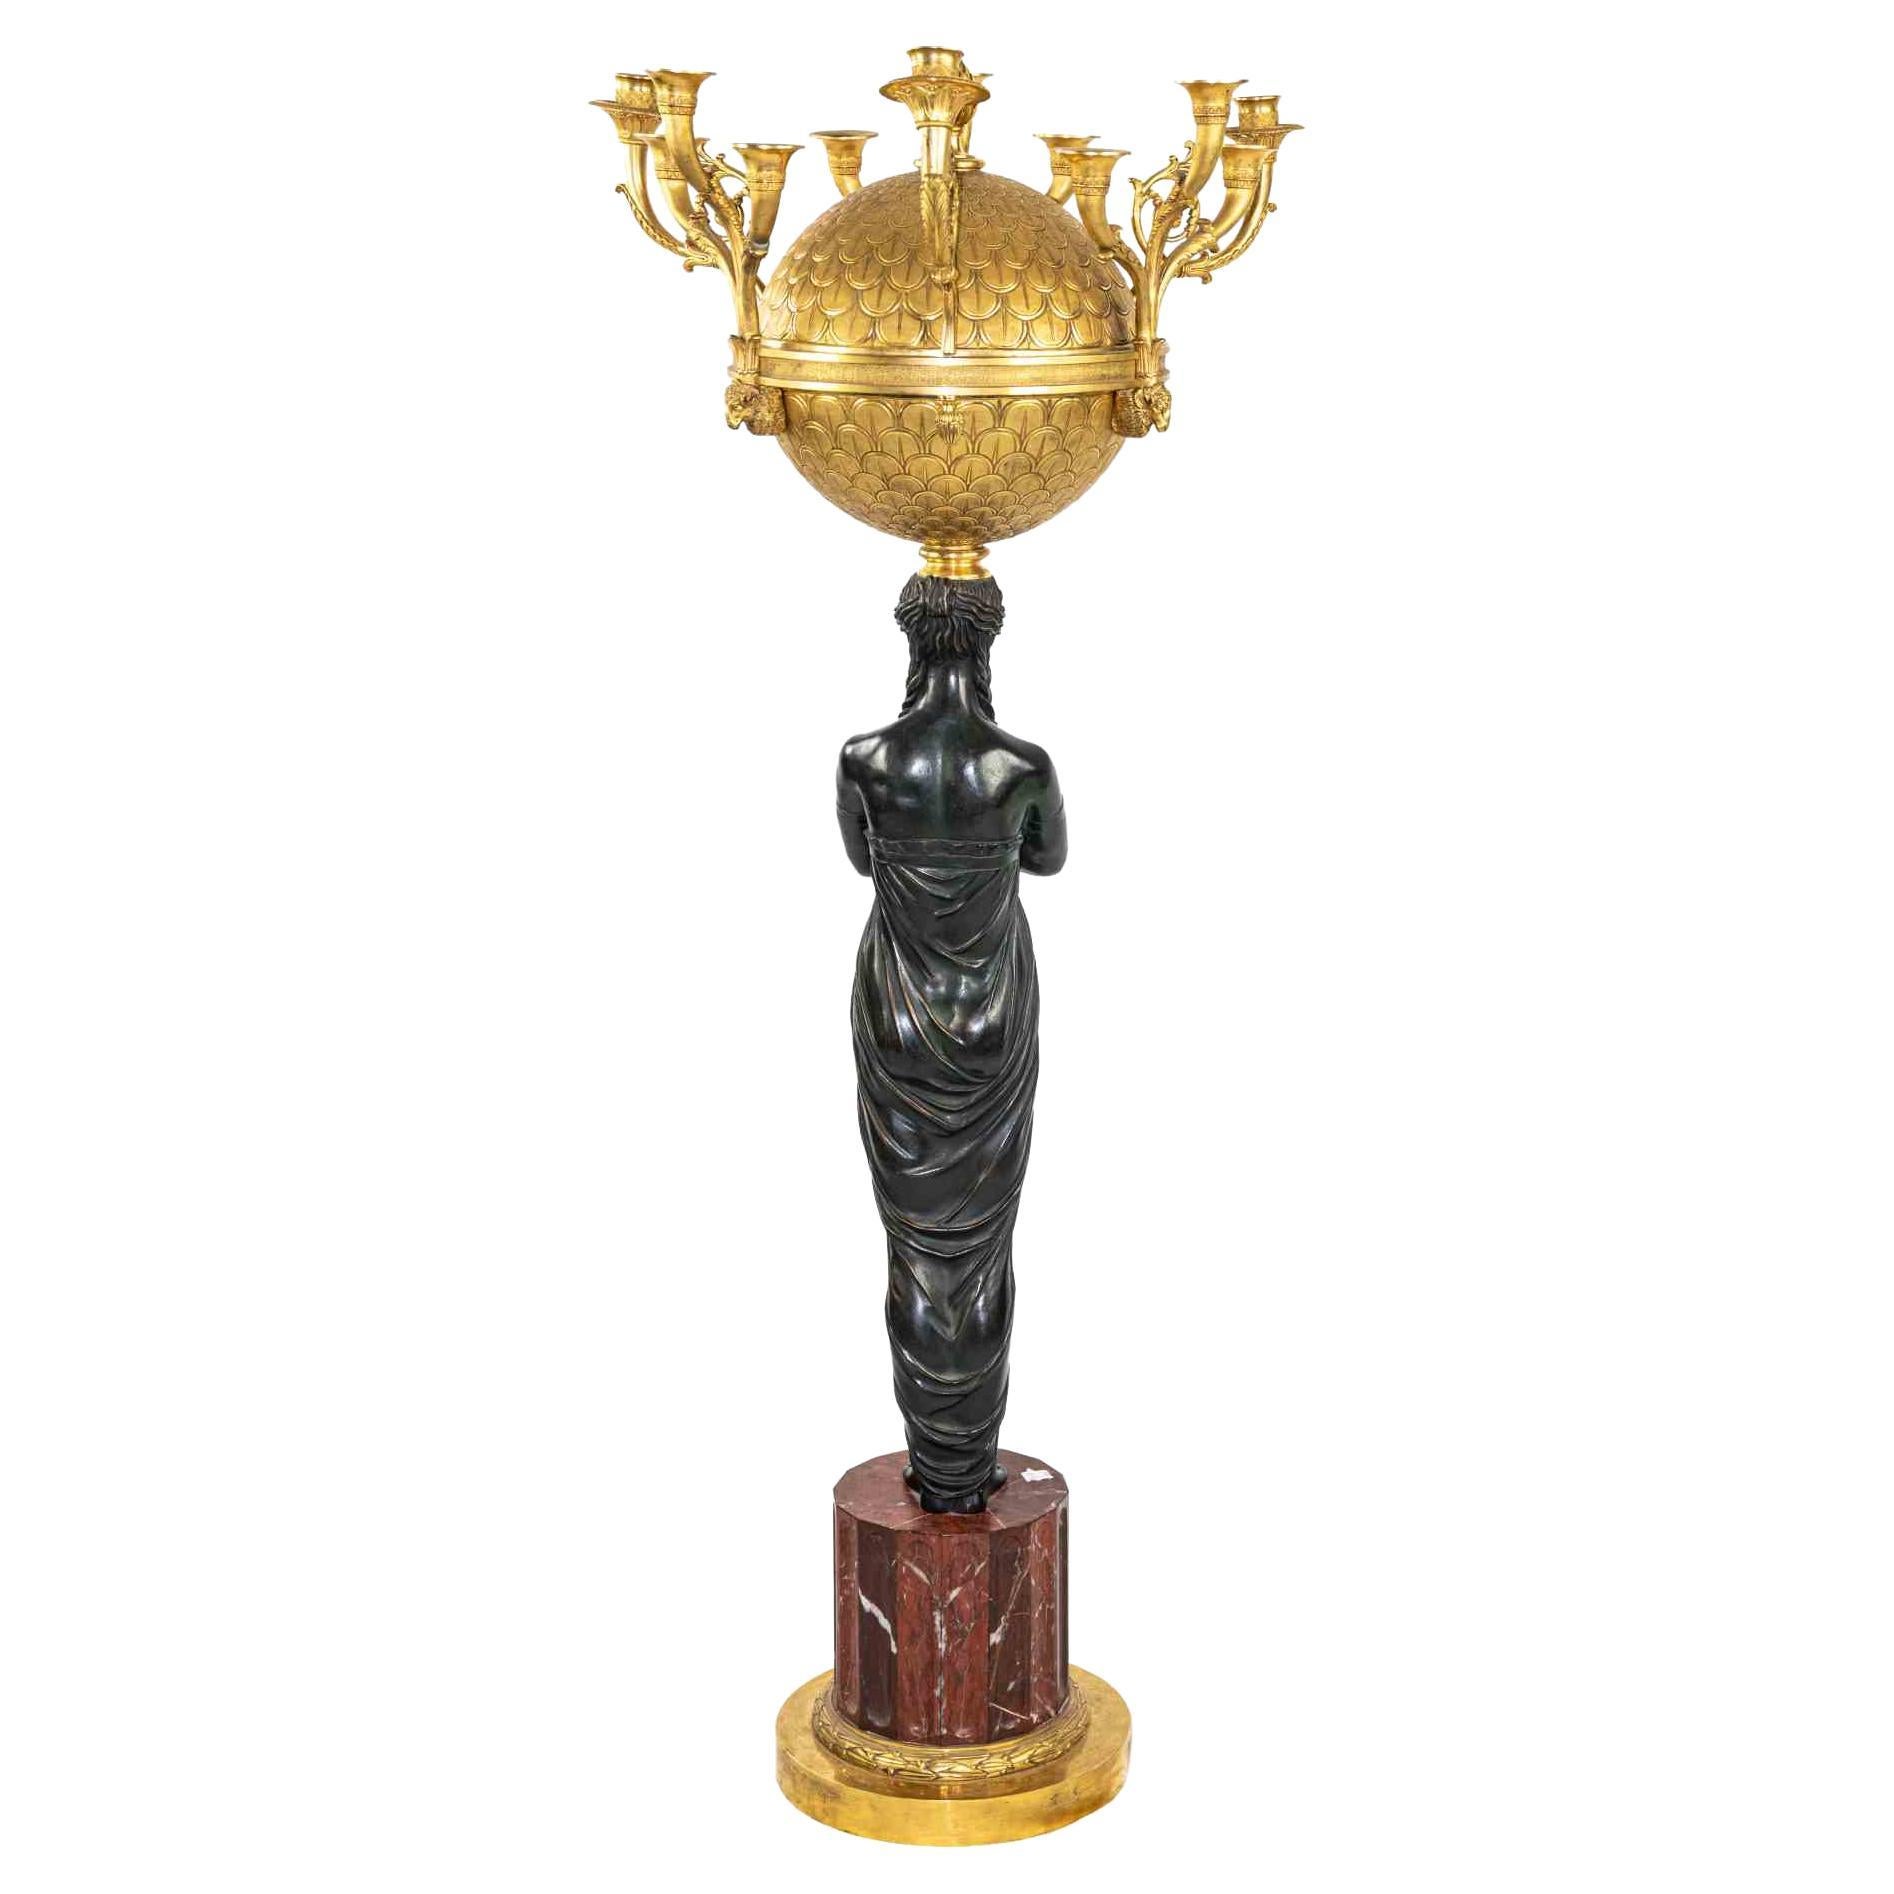 Candelabra is a decorative item realized of 19th Century.

Base in red French marble: 24 x 24 cm

The sculpture is a Core model by Pierre-Philippe Thomire.

The candelabrum is made in the early 19th Century in the Charles X era.

An example